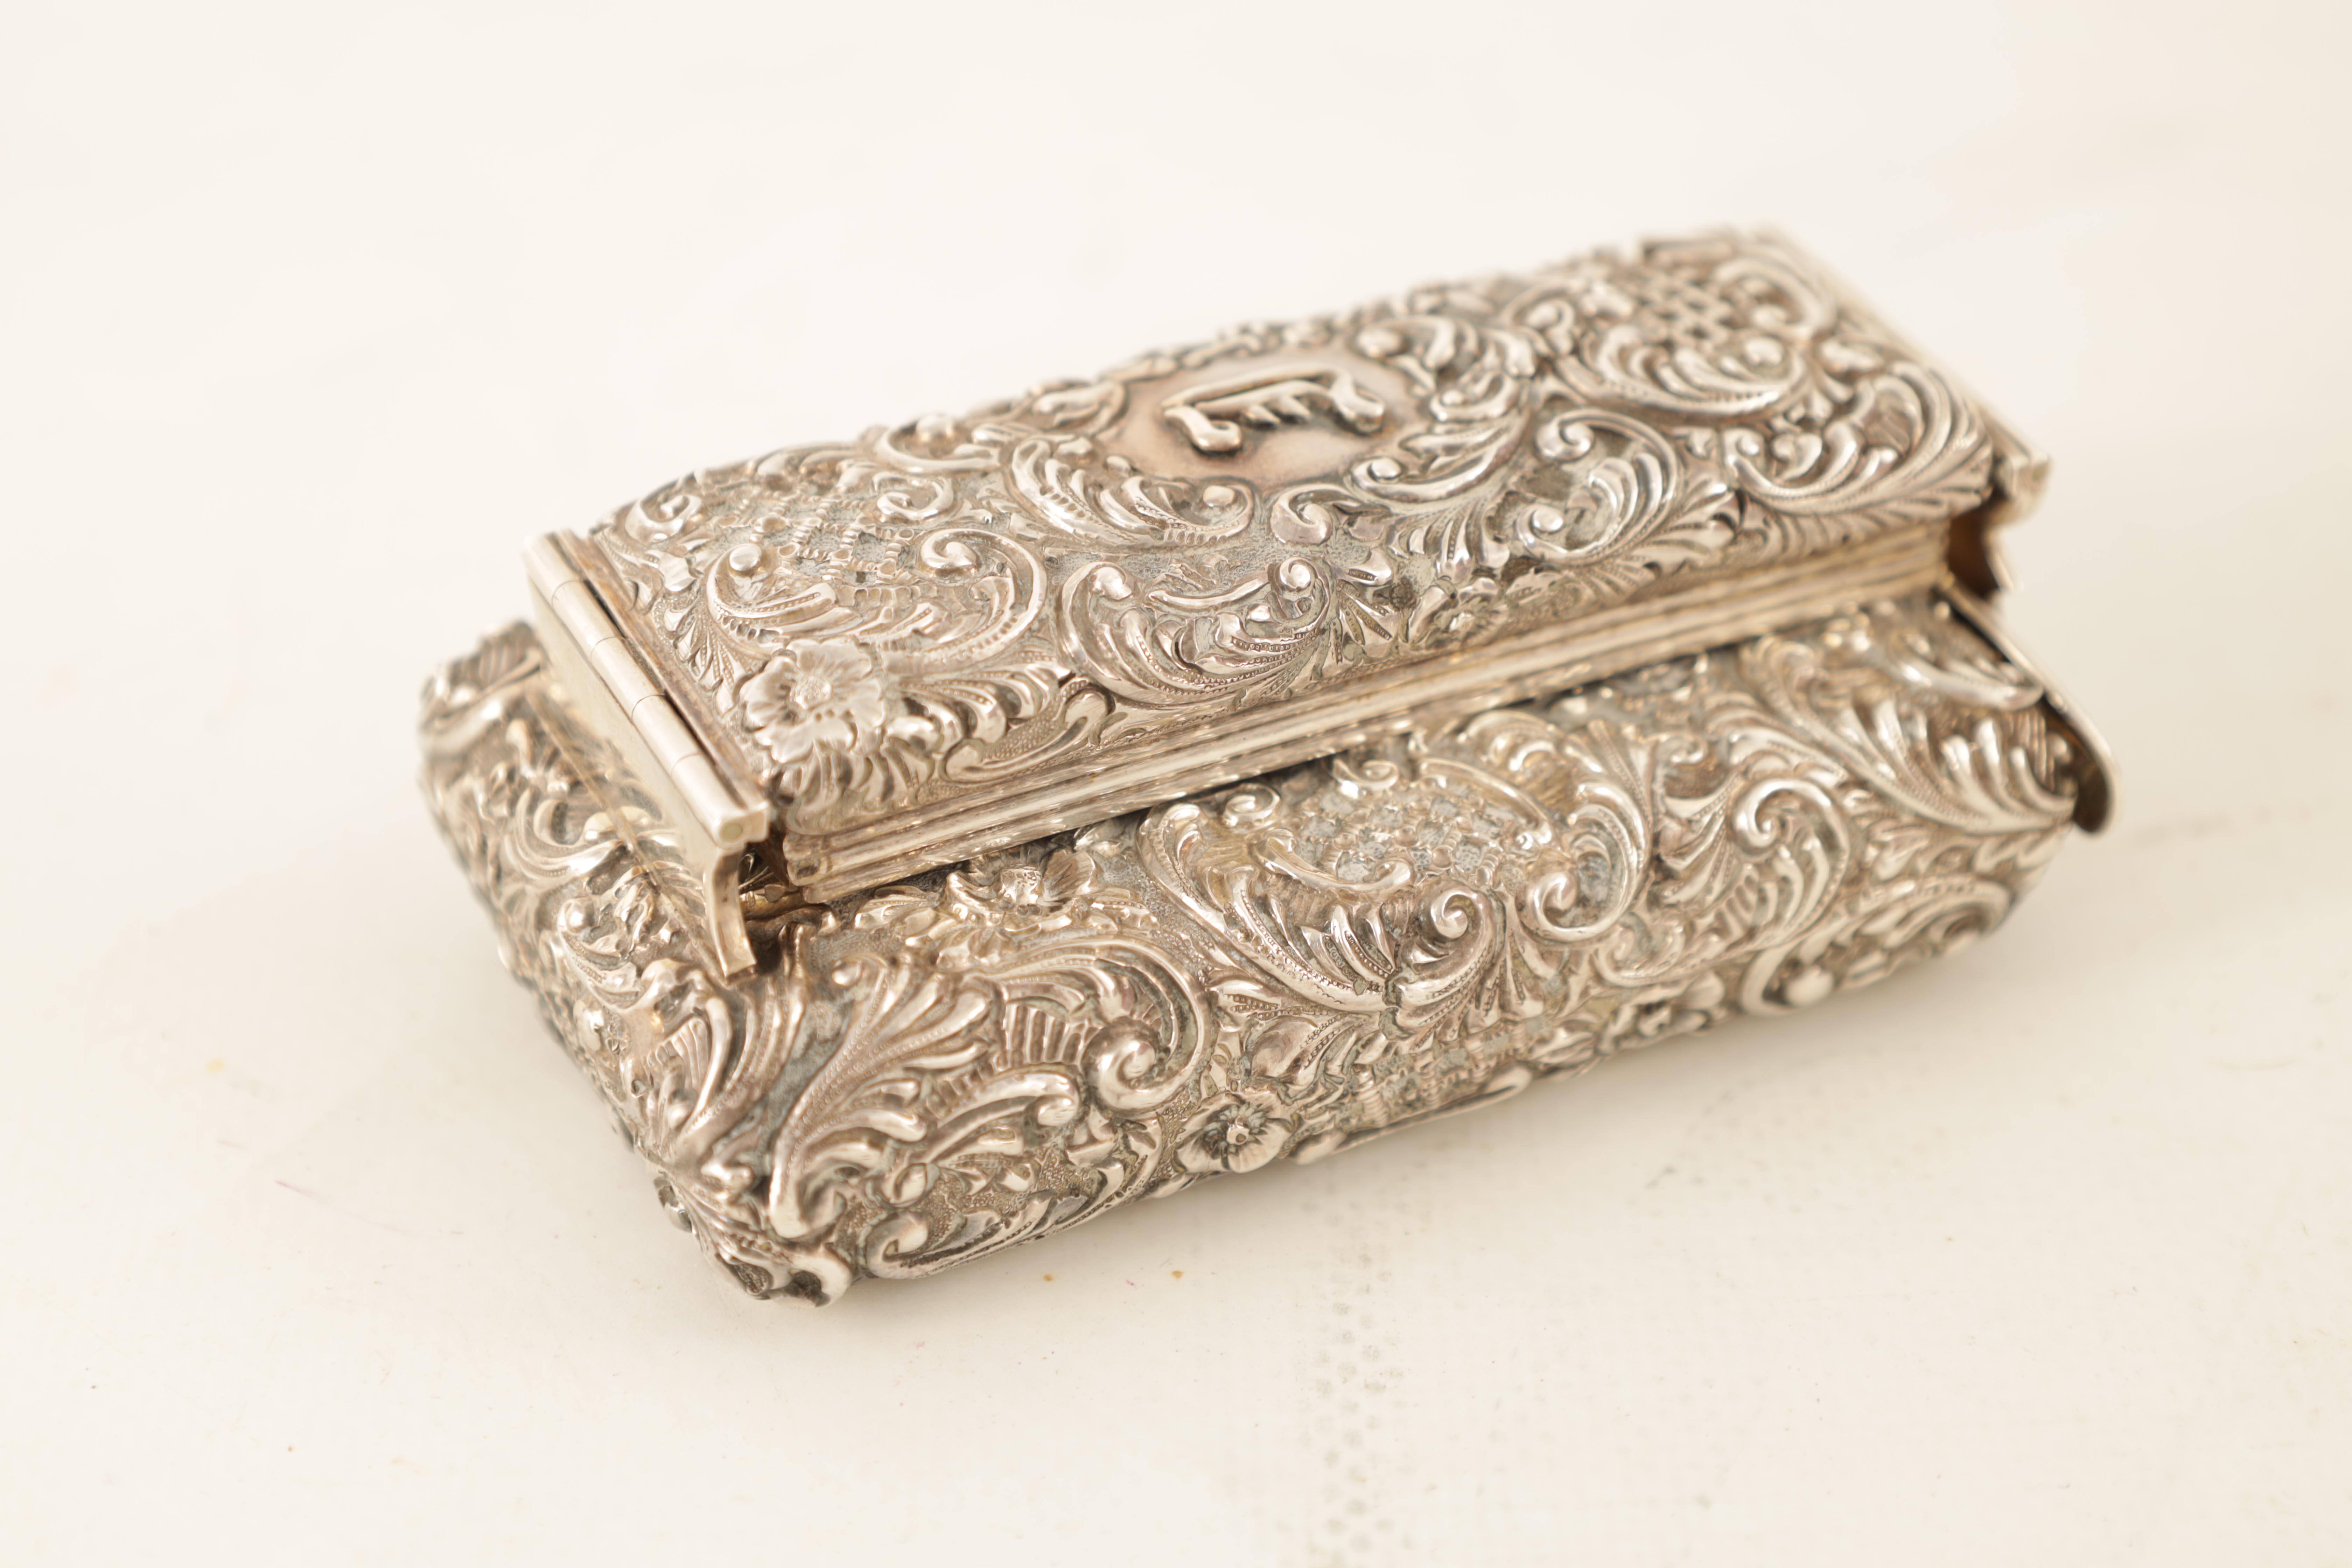 A FINE VICTORIAN CROCODILE SKIN LADIES TRAVELLING CASE BY DREW & SONS PICCADILLY CIRCUS, LONDON with - Image 31 of 48